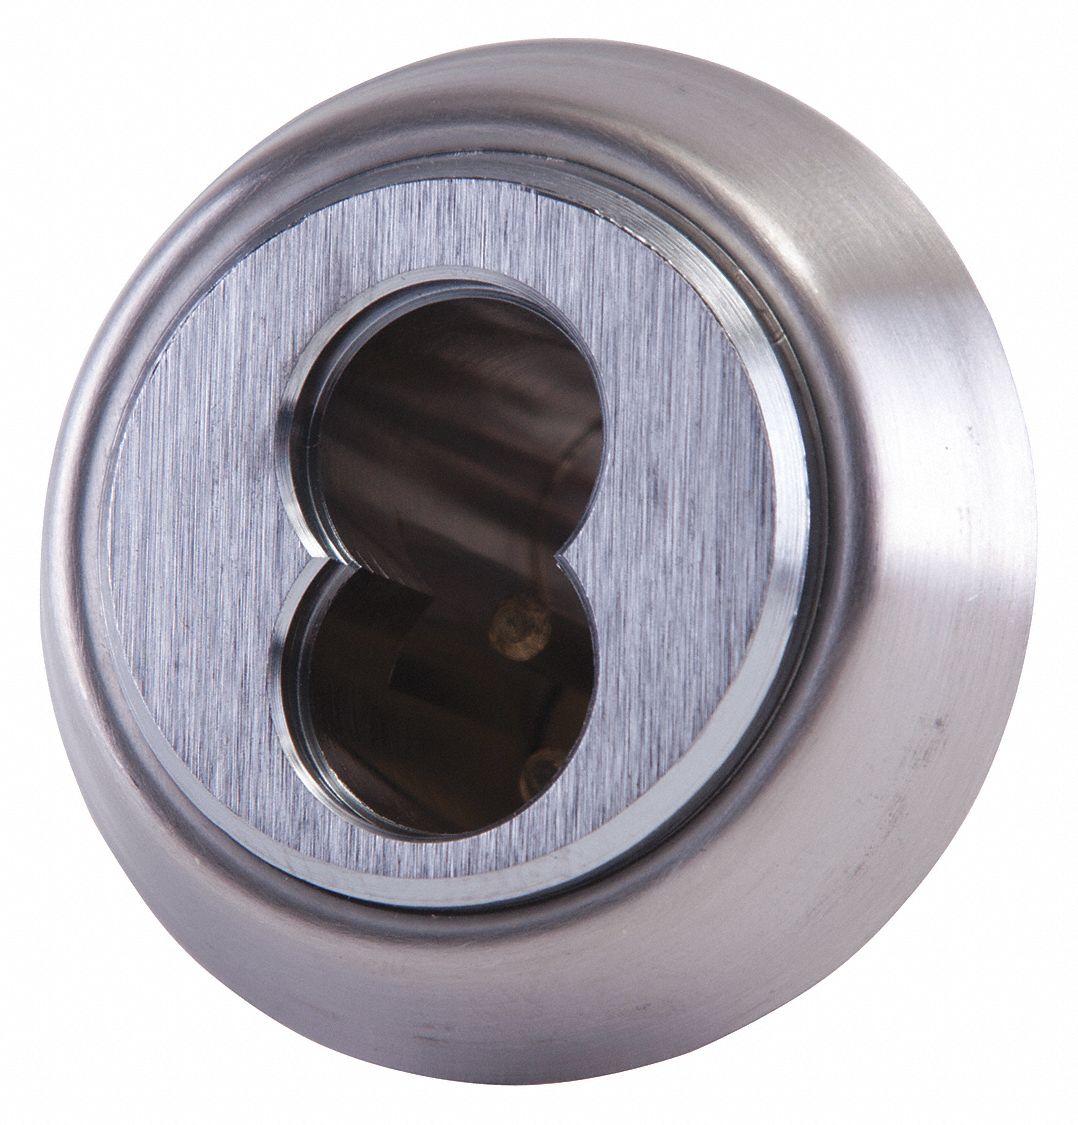 BEST 1E74-C128RP3626 Mortise Cylinder, 128 Cam, Brass